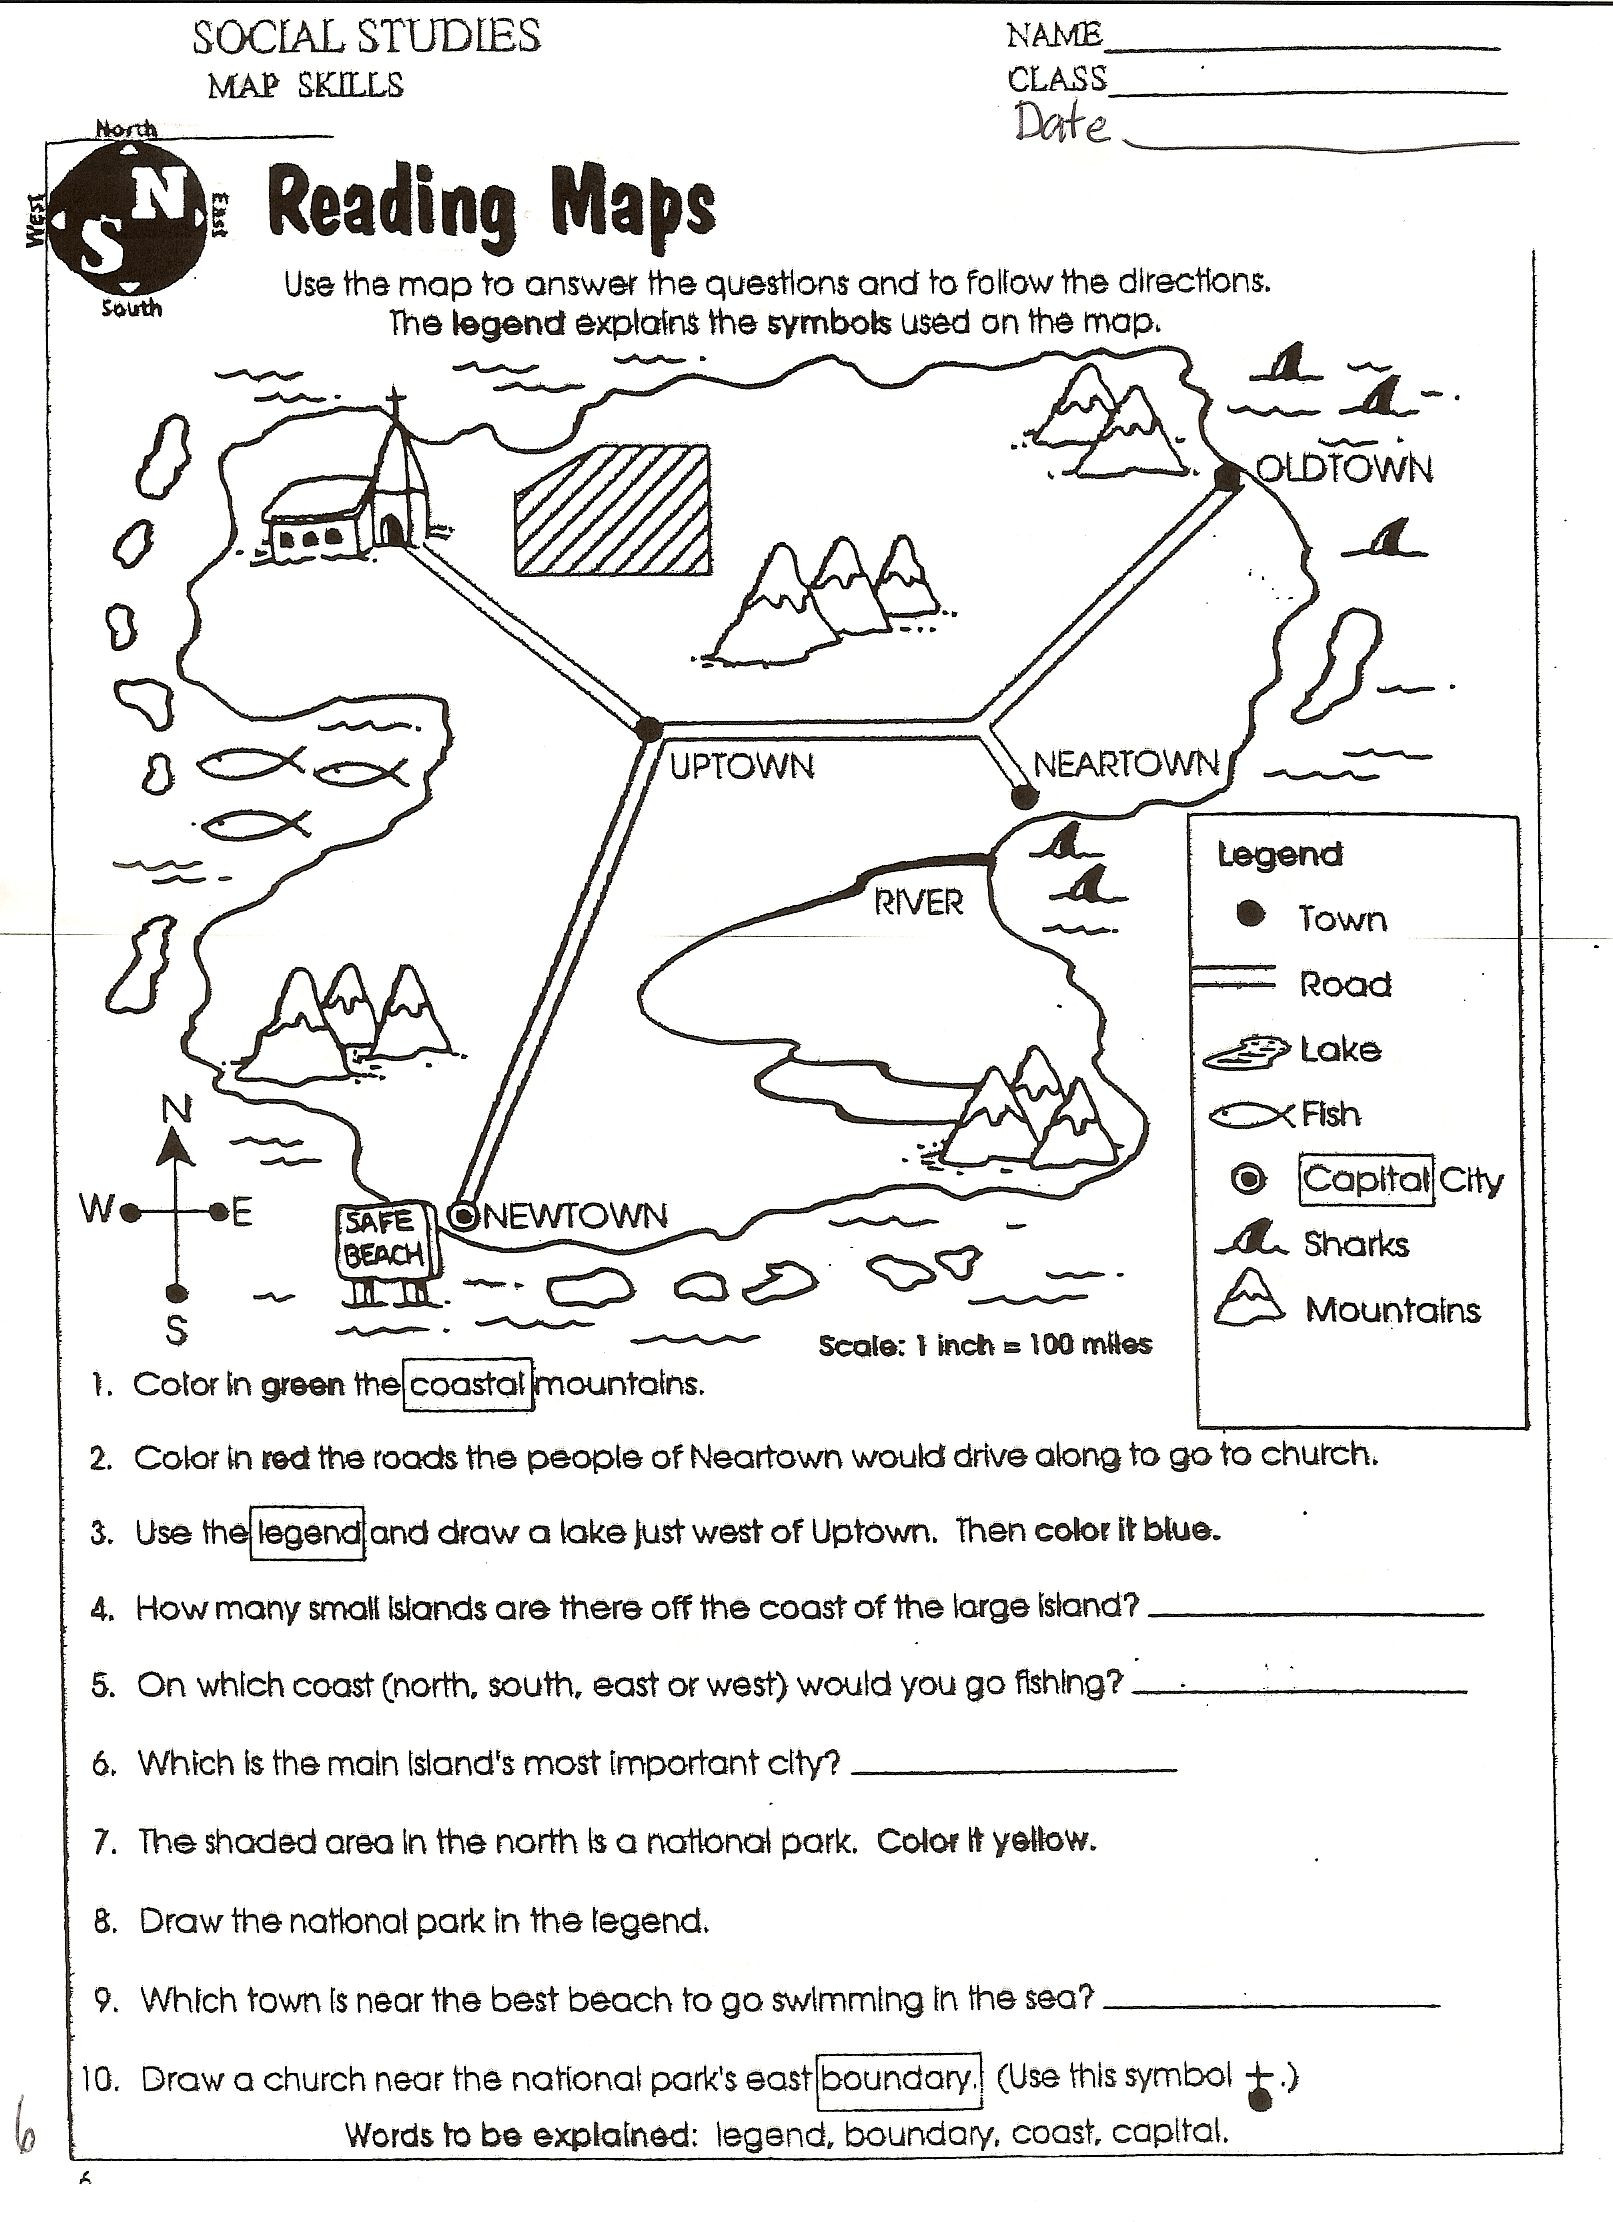 5 themes Of Geography Worksheet Best social Stu S for 7th Graders Worksheet